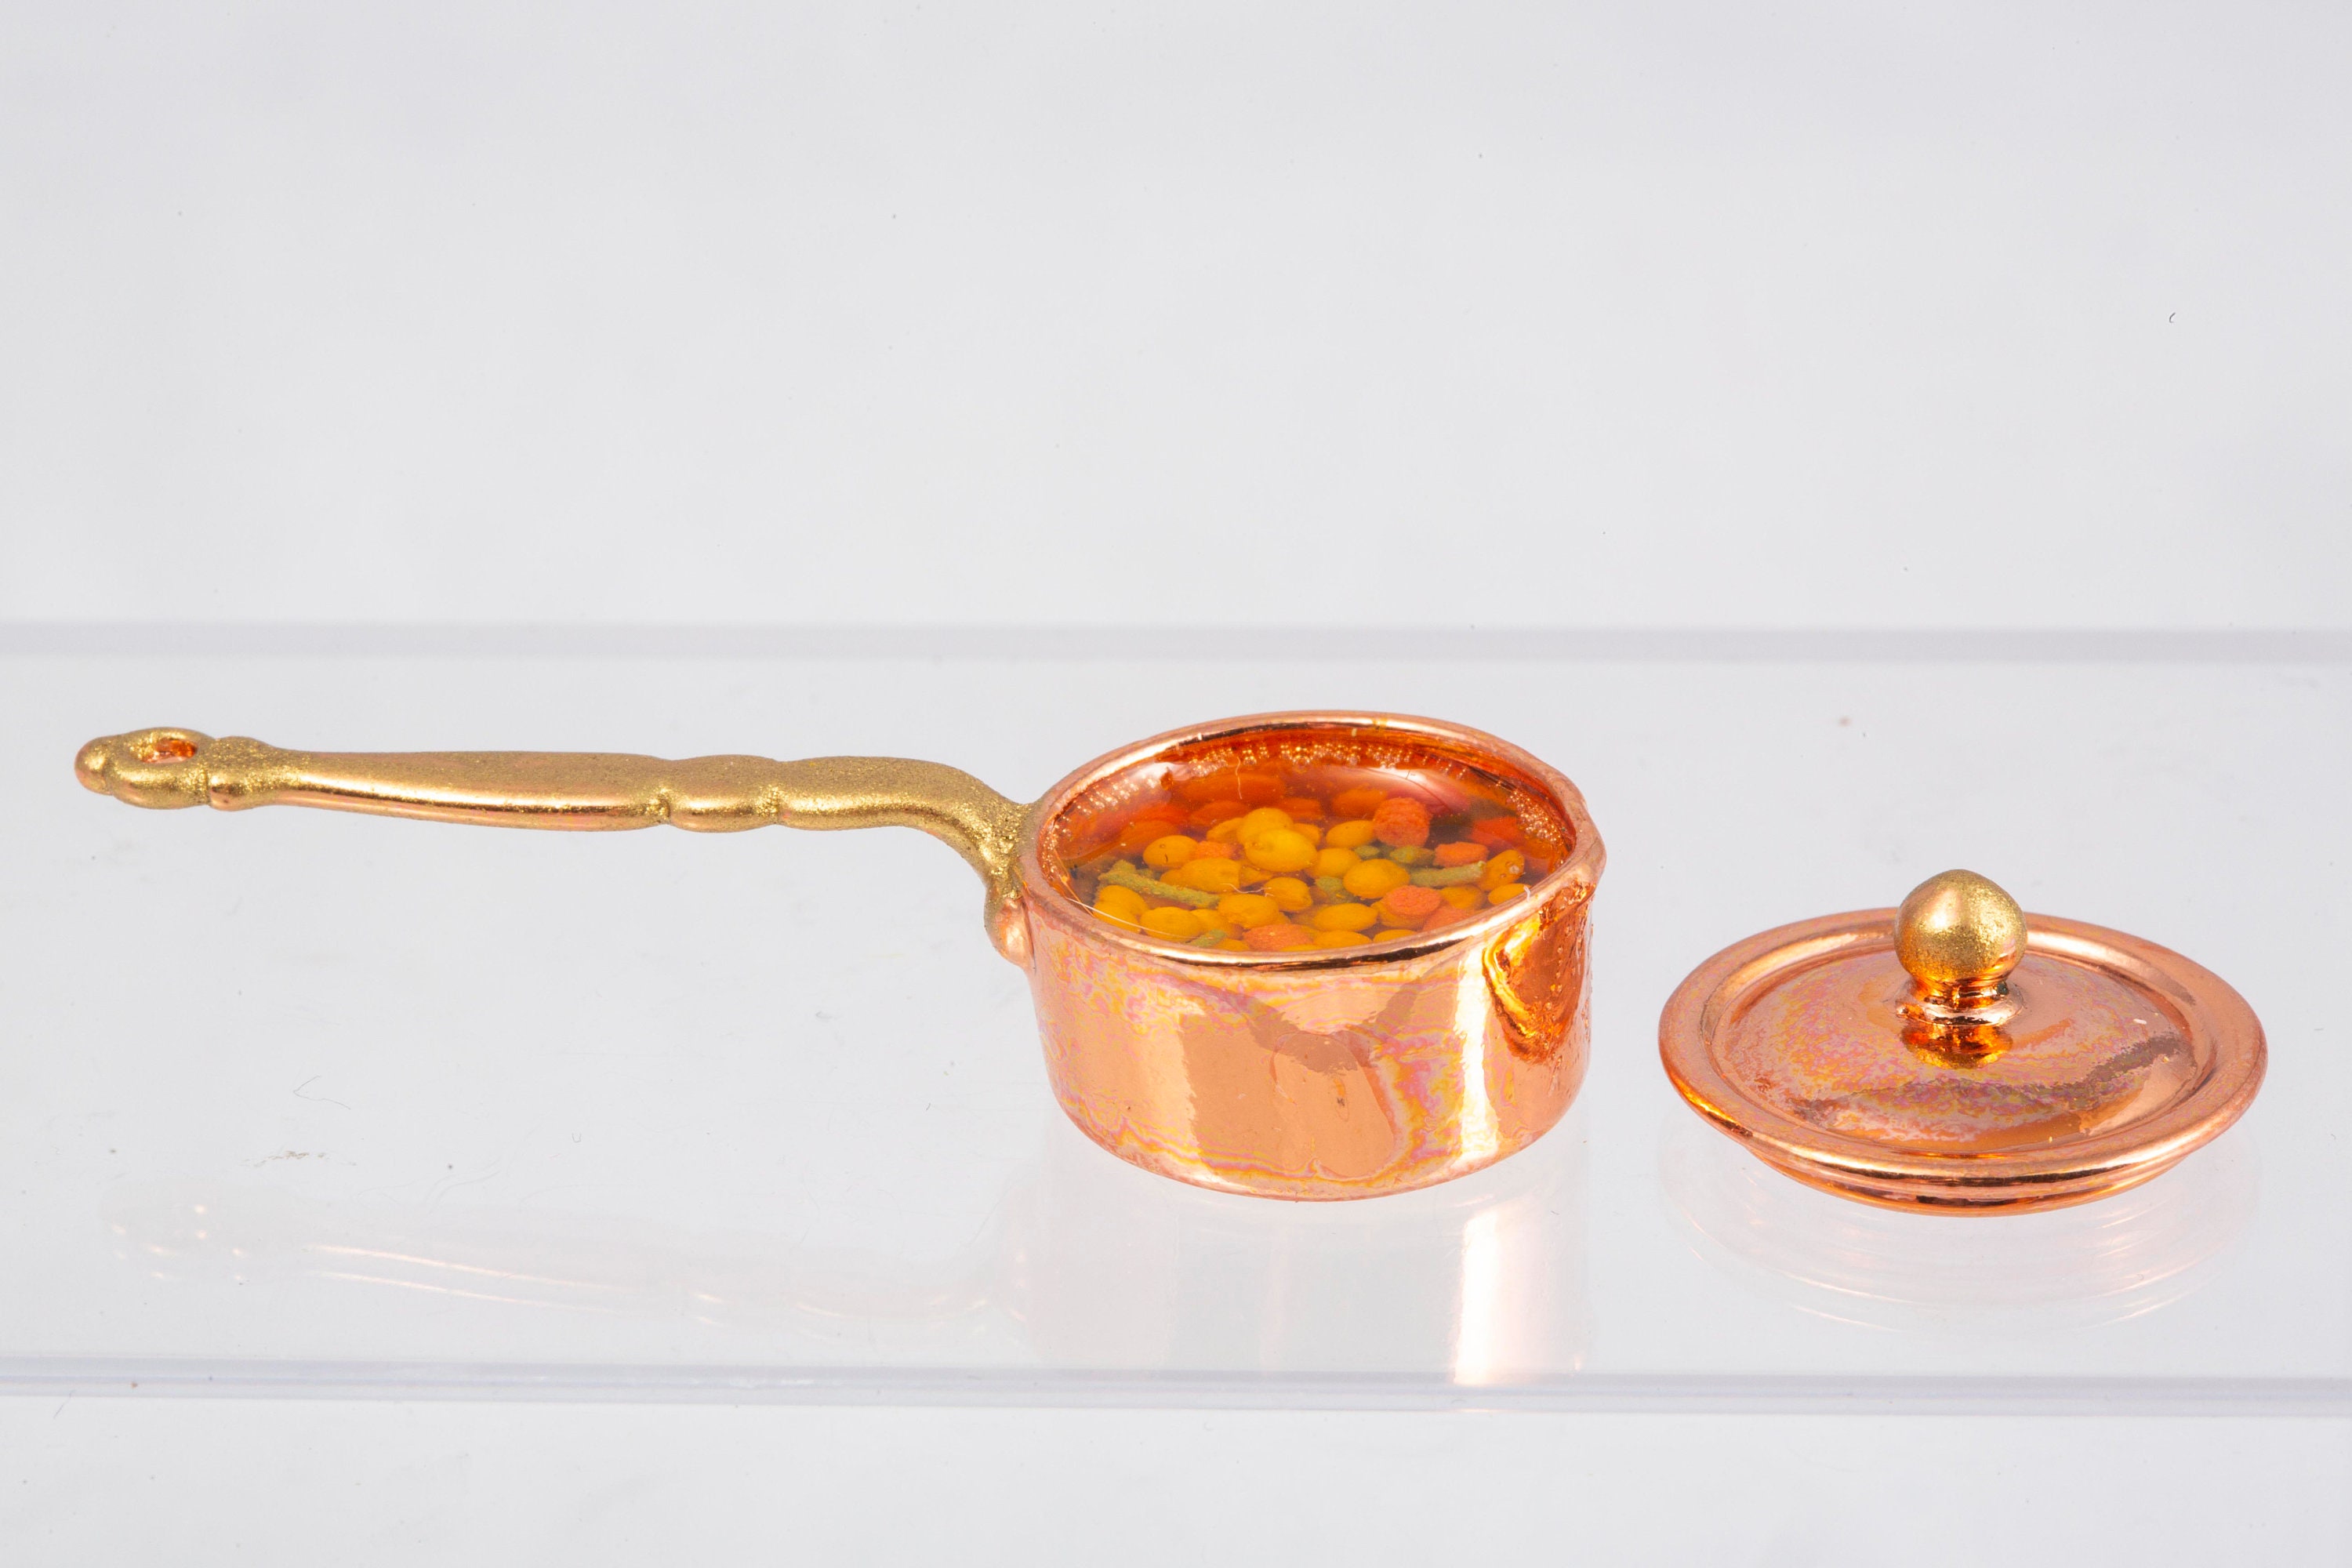 Dollhouse Miniatures - Copper Pot Filled With Mixed Vegetables in Water For Stove Cooking